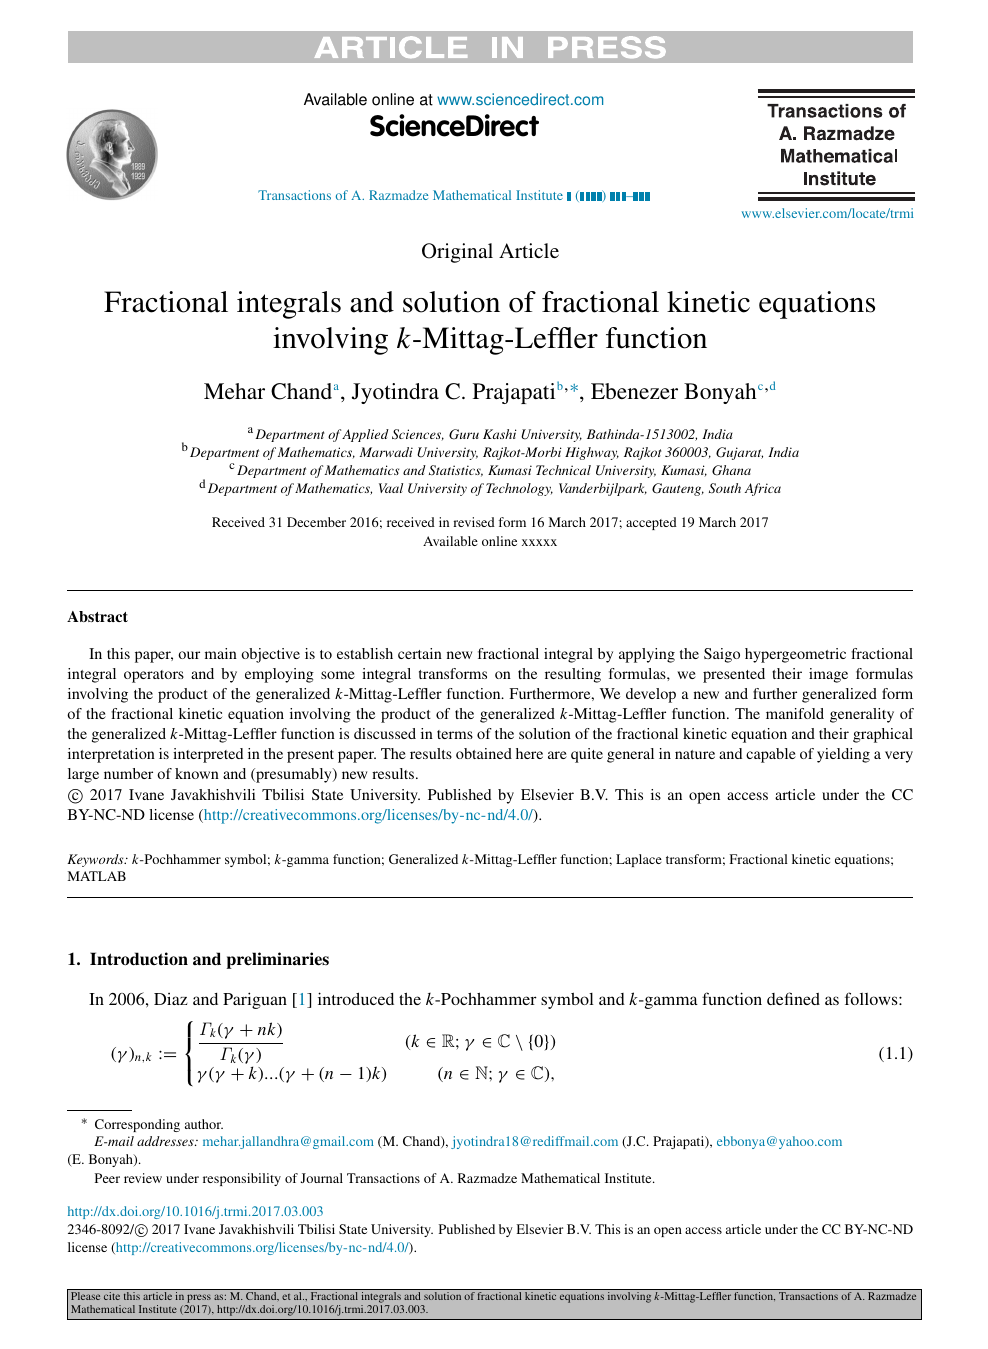 Fractional Integrals And Solution Of Fractional Kinetic Equations Involving K Mittag Leffler Function Topic Of Research Paper In Mathematics Download Scholarly Article Pdf And Read For Free On Cyberleninka Open Science Hub